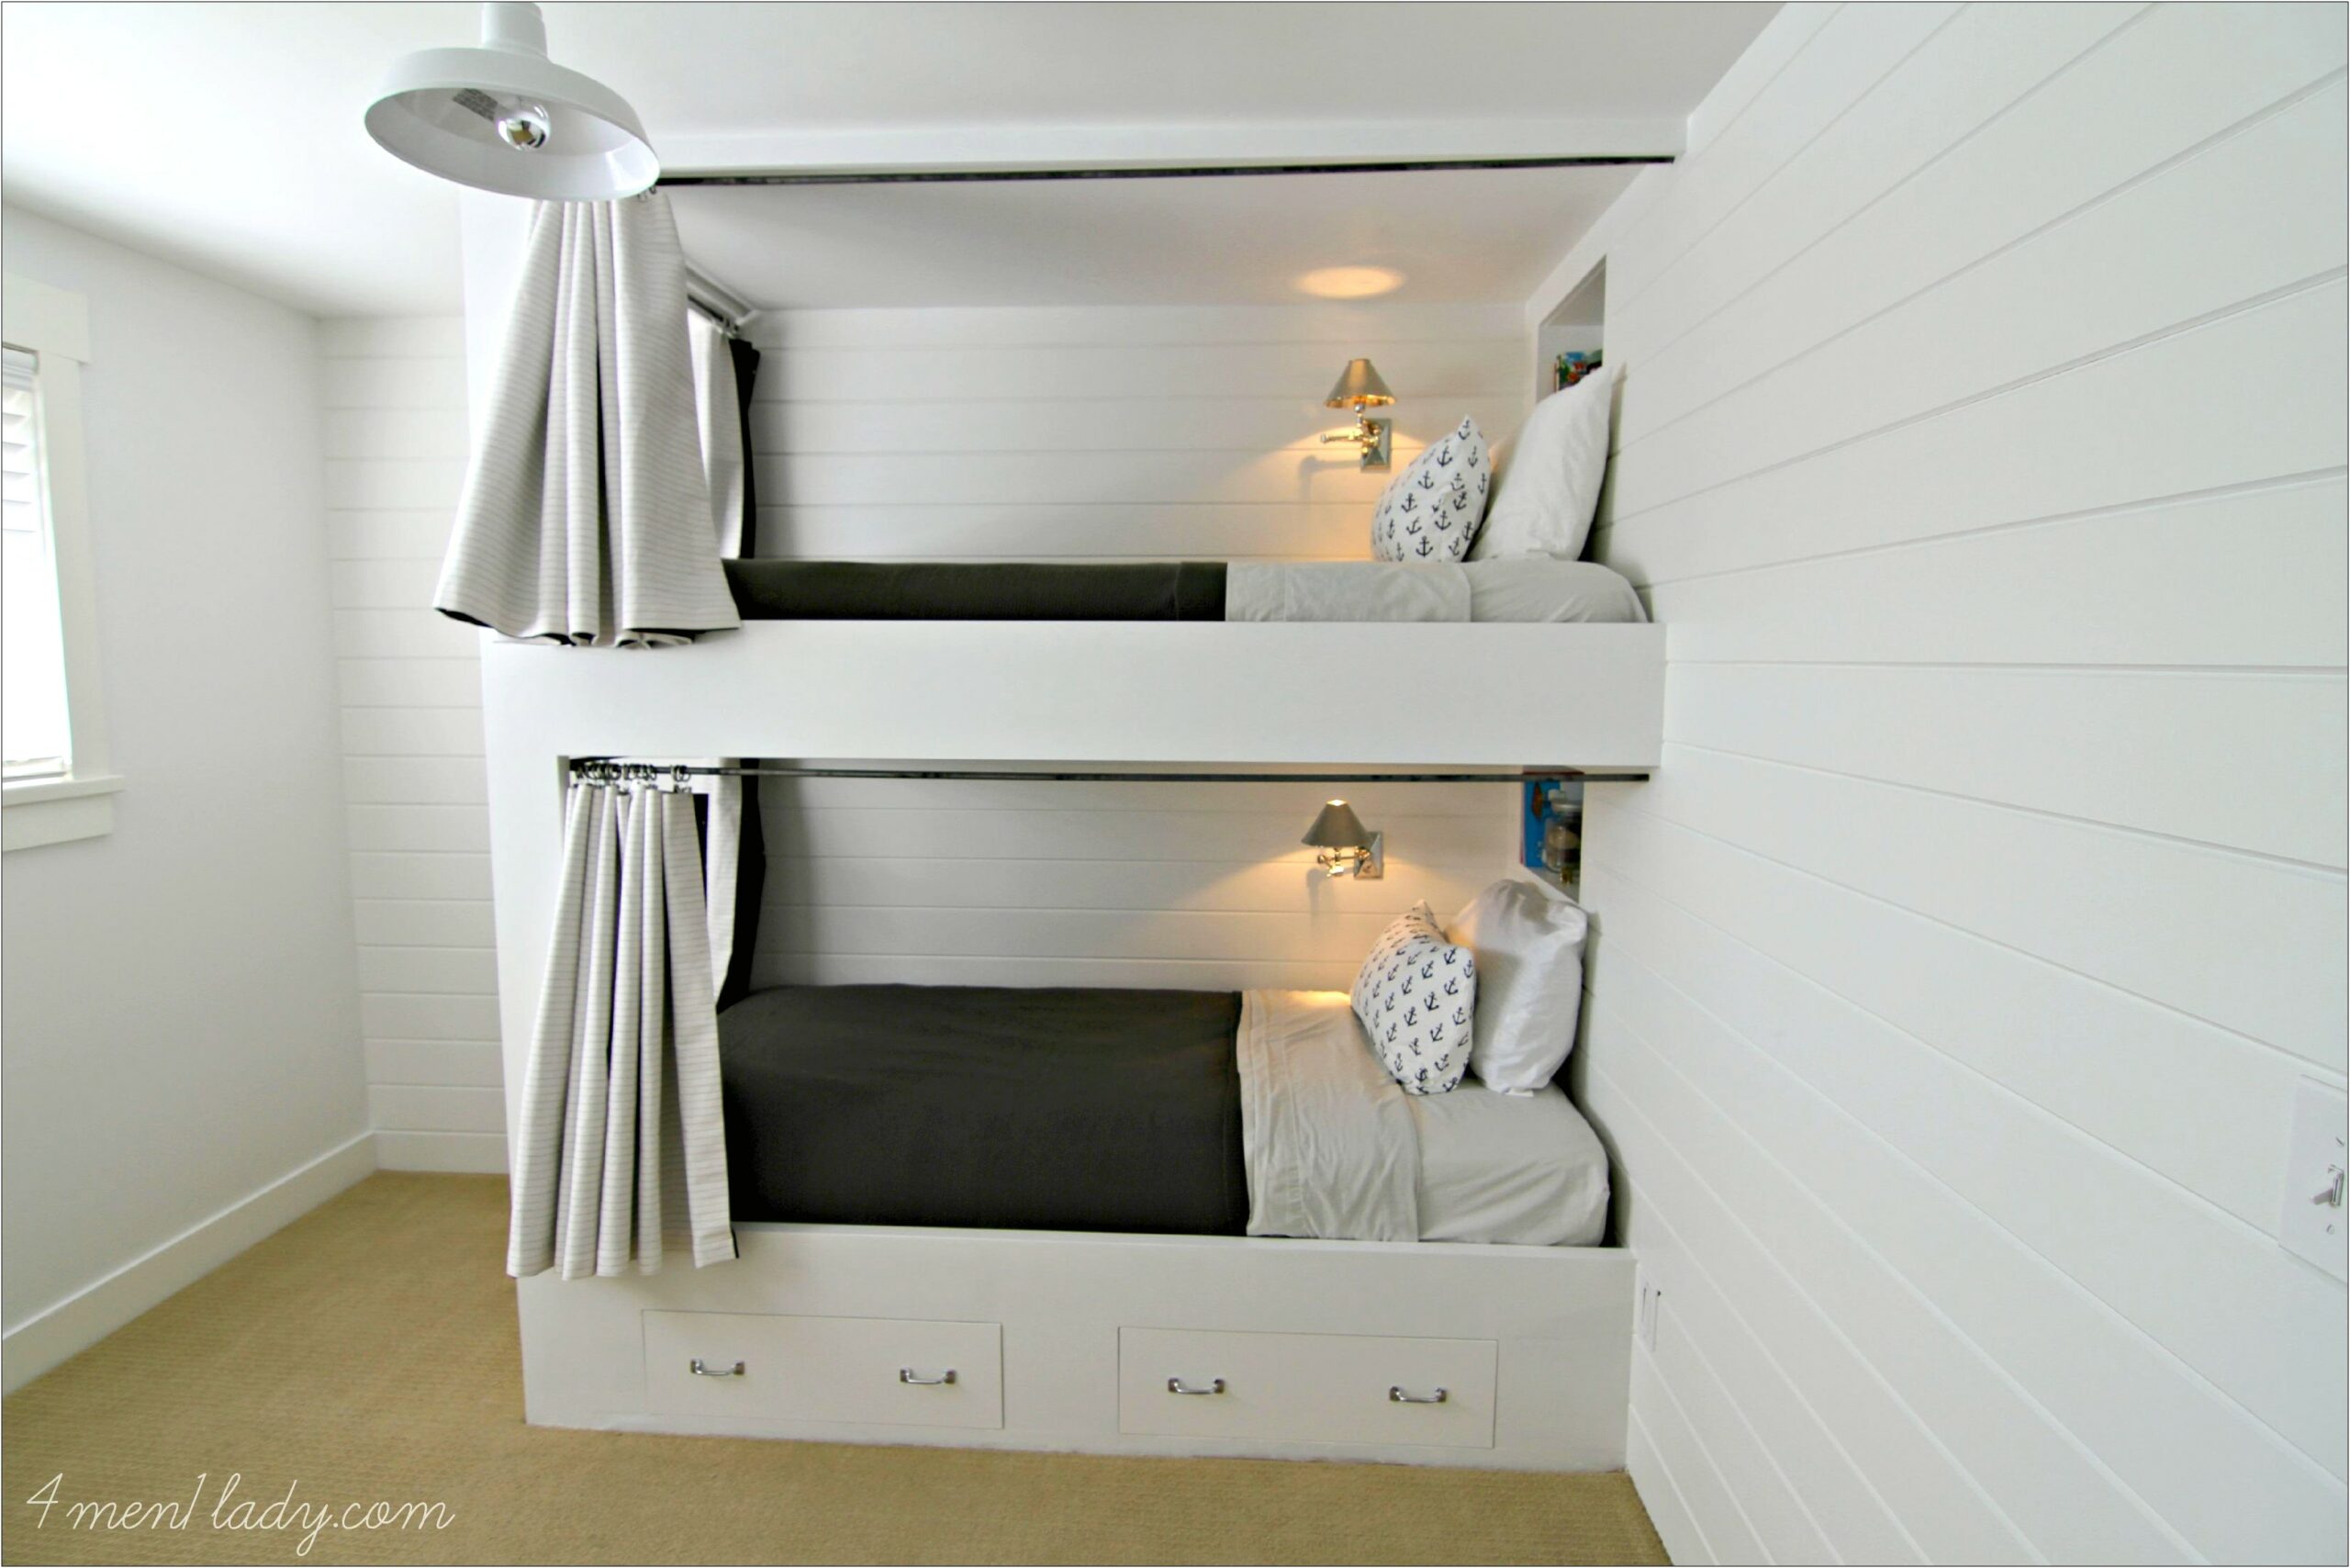 Free Design Templates For Built In Bunk Bed